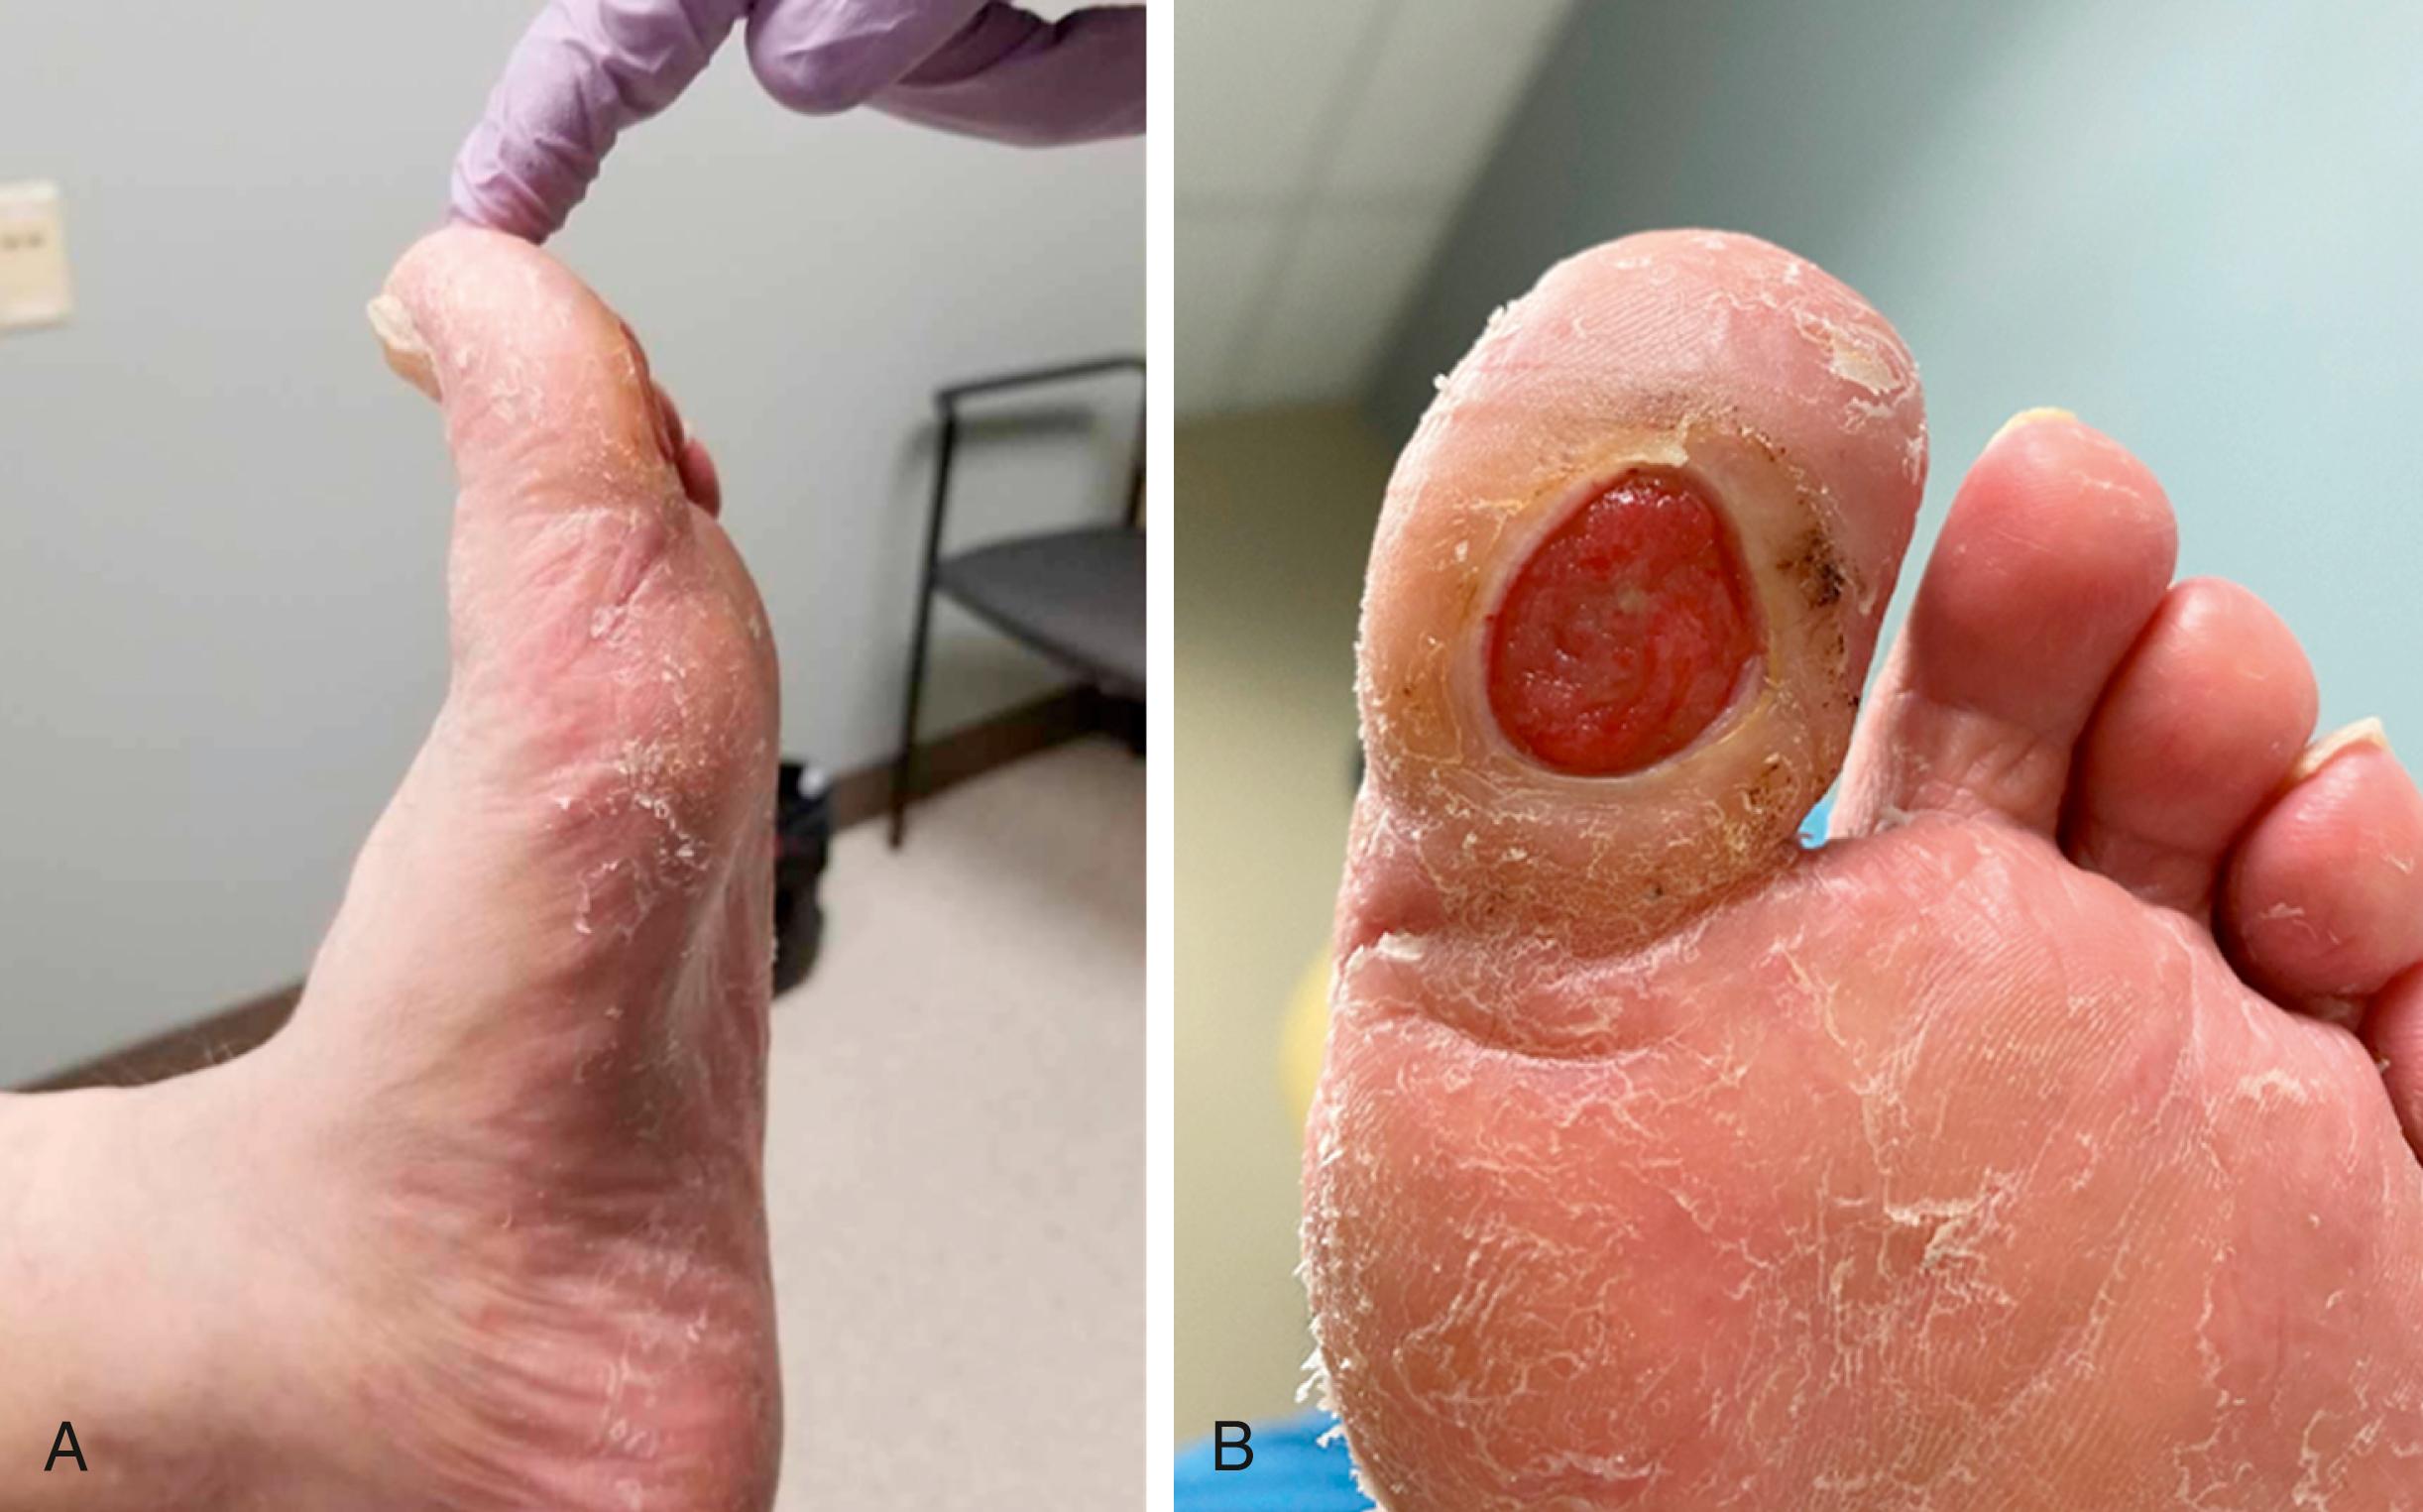 Figure 117.4, ( A ) Decreased dorsiflexion of the metatarsophalangeal joint. ( B ) Resultant ulcer on the plantar aspect of the hallux interphalangeal joint.